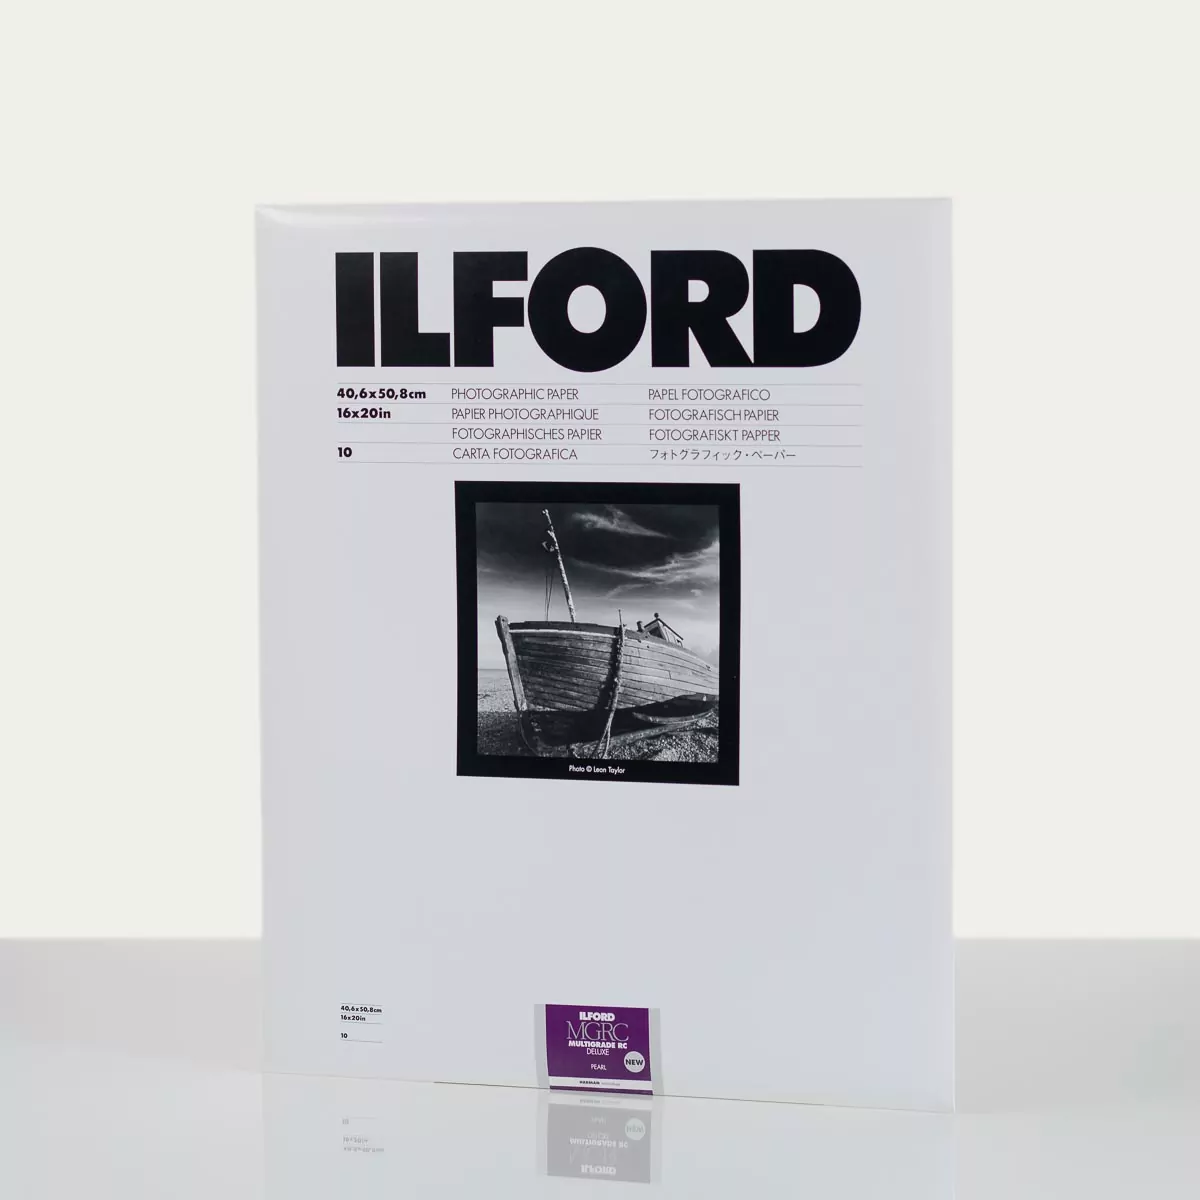 ILFORD MULTIGRADE RC DELUXE MGRCDL44M 40.6×50.8cm (10 sheets)